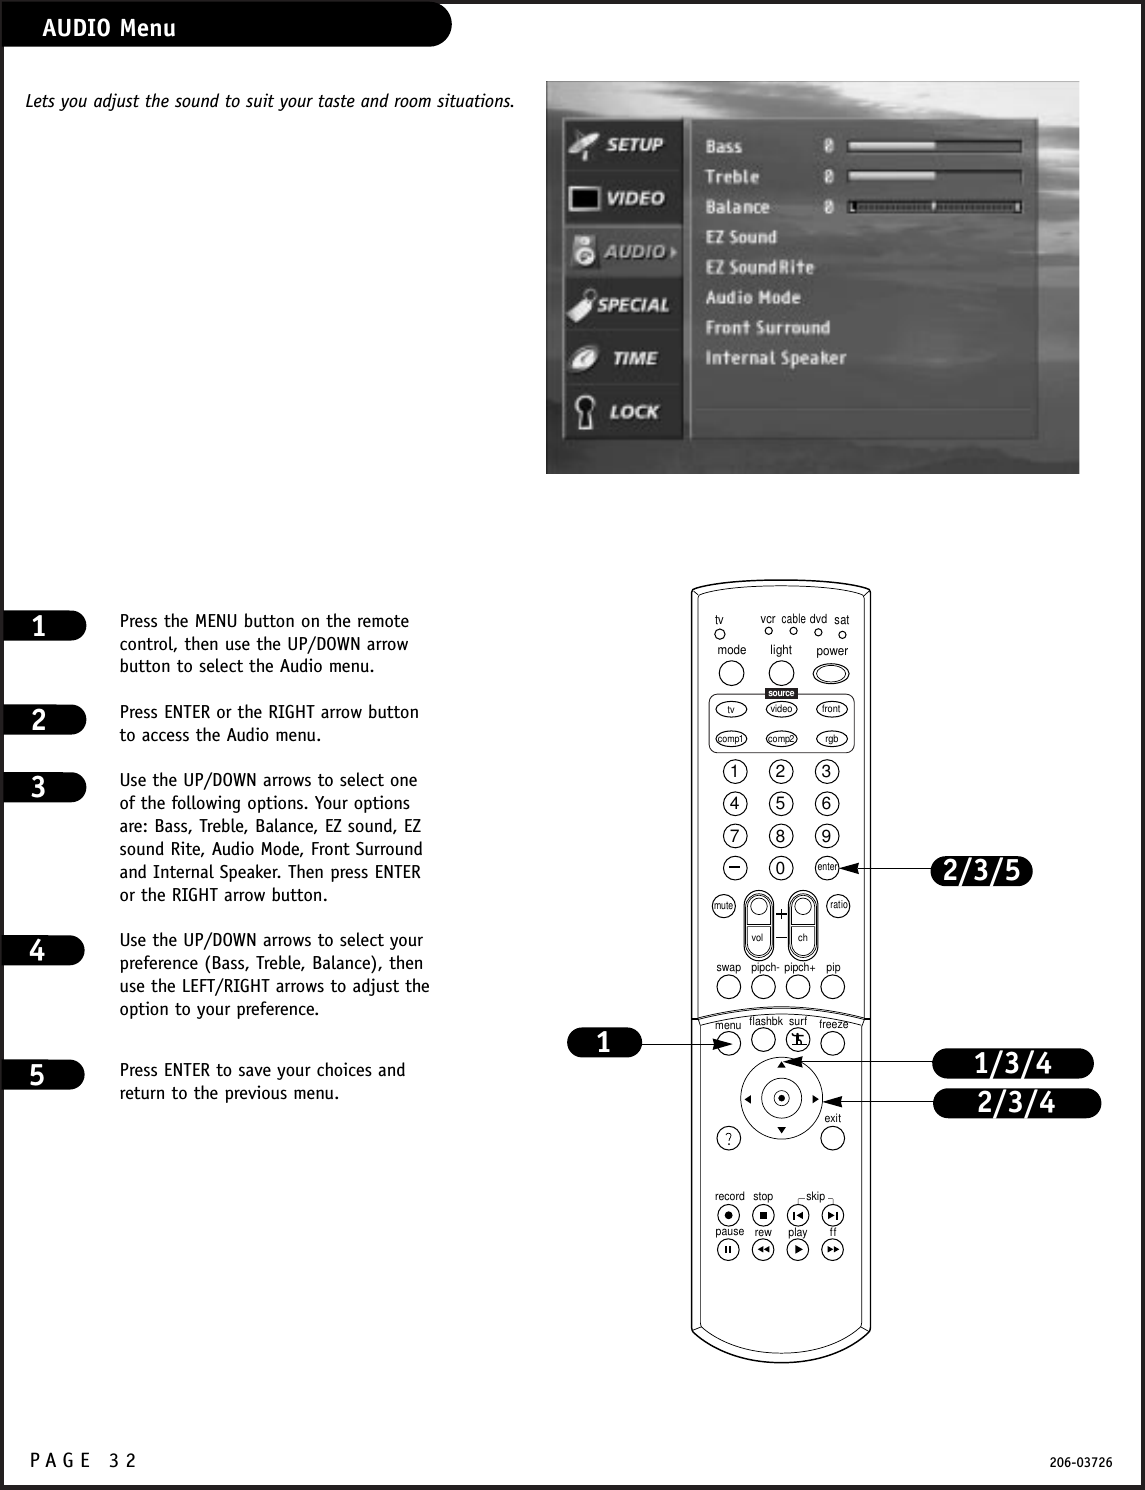 P A GE 32 206-03726AUDIO MenuPress the MENU button on the remotecontrol, then use the UP/DOWN arrowbutton to select the Audio menu.Press ENTER or the RIGHT arrow buttonto access the Audio menu.Use the UP/DOWN arrows to select oneof the following options. Your optionsare: Bass, Treble, Balance, EZ sound, EZsound Rite, Audio Mode, Front Surroundand Internal Speaker. Then press ENTERor the RIGHT arrow button.Use the UP/DOWN arrows to select yourpreference (Bass, Treble, Balance), thenuse the LEFT/RIGHT arrows to adjust theoption to your preference.Press ENTER to save your choices andreturn to the previous menu.1231234567890tvmode light power   tv video frontcomp1 rgbvcrcabledvdsatmuteswap pipch- pipch+ pipmenurecord stoppause rew play ffexitflashbk surf freezevol chratiocomp2skipsourceenter1/3/42/3/41Lets you adjust the sound to suit your taste and room situations. 2/3/545